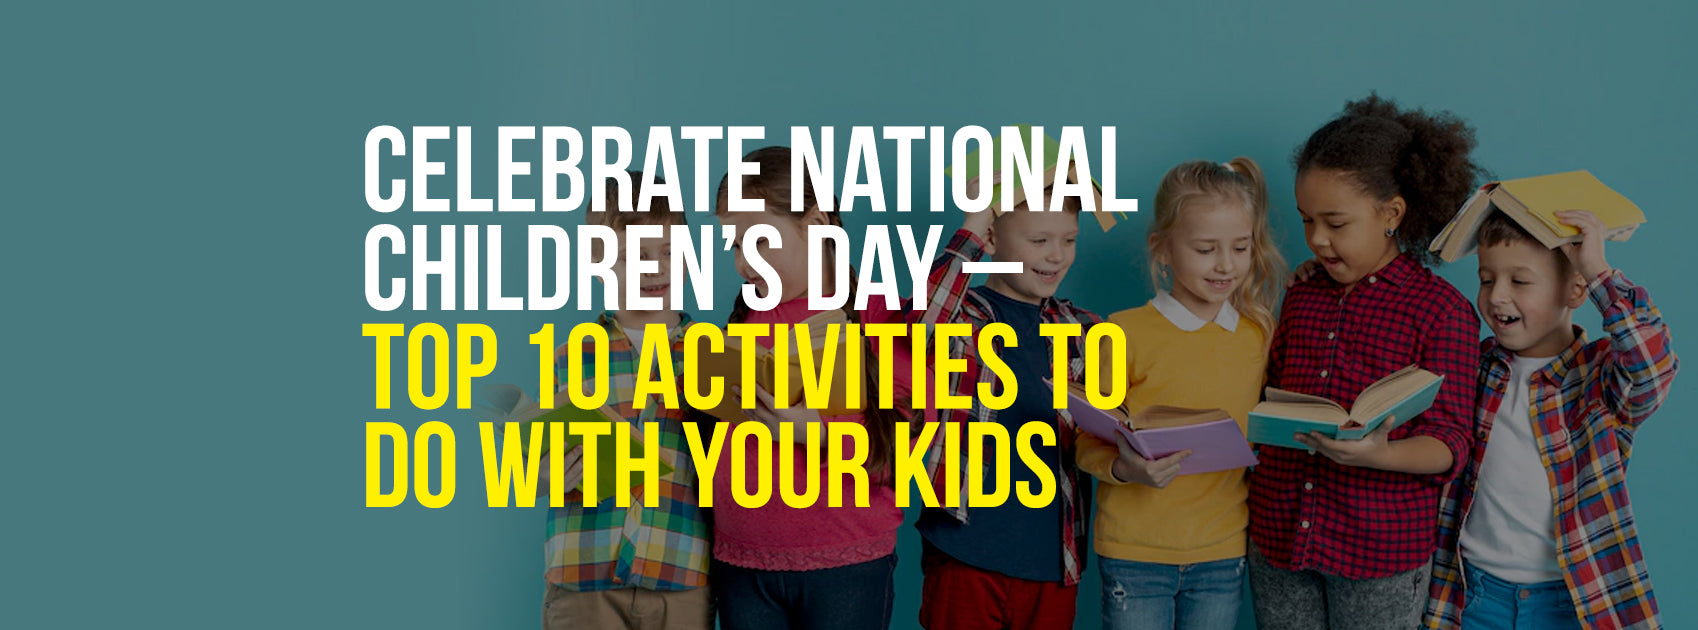 National Children’s Day, Top 10 Activities to Do with Your Kids